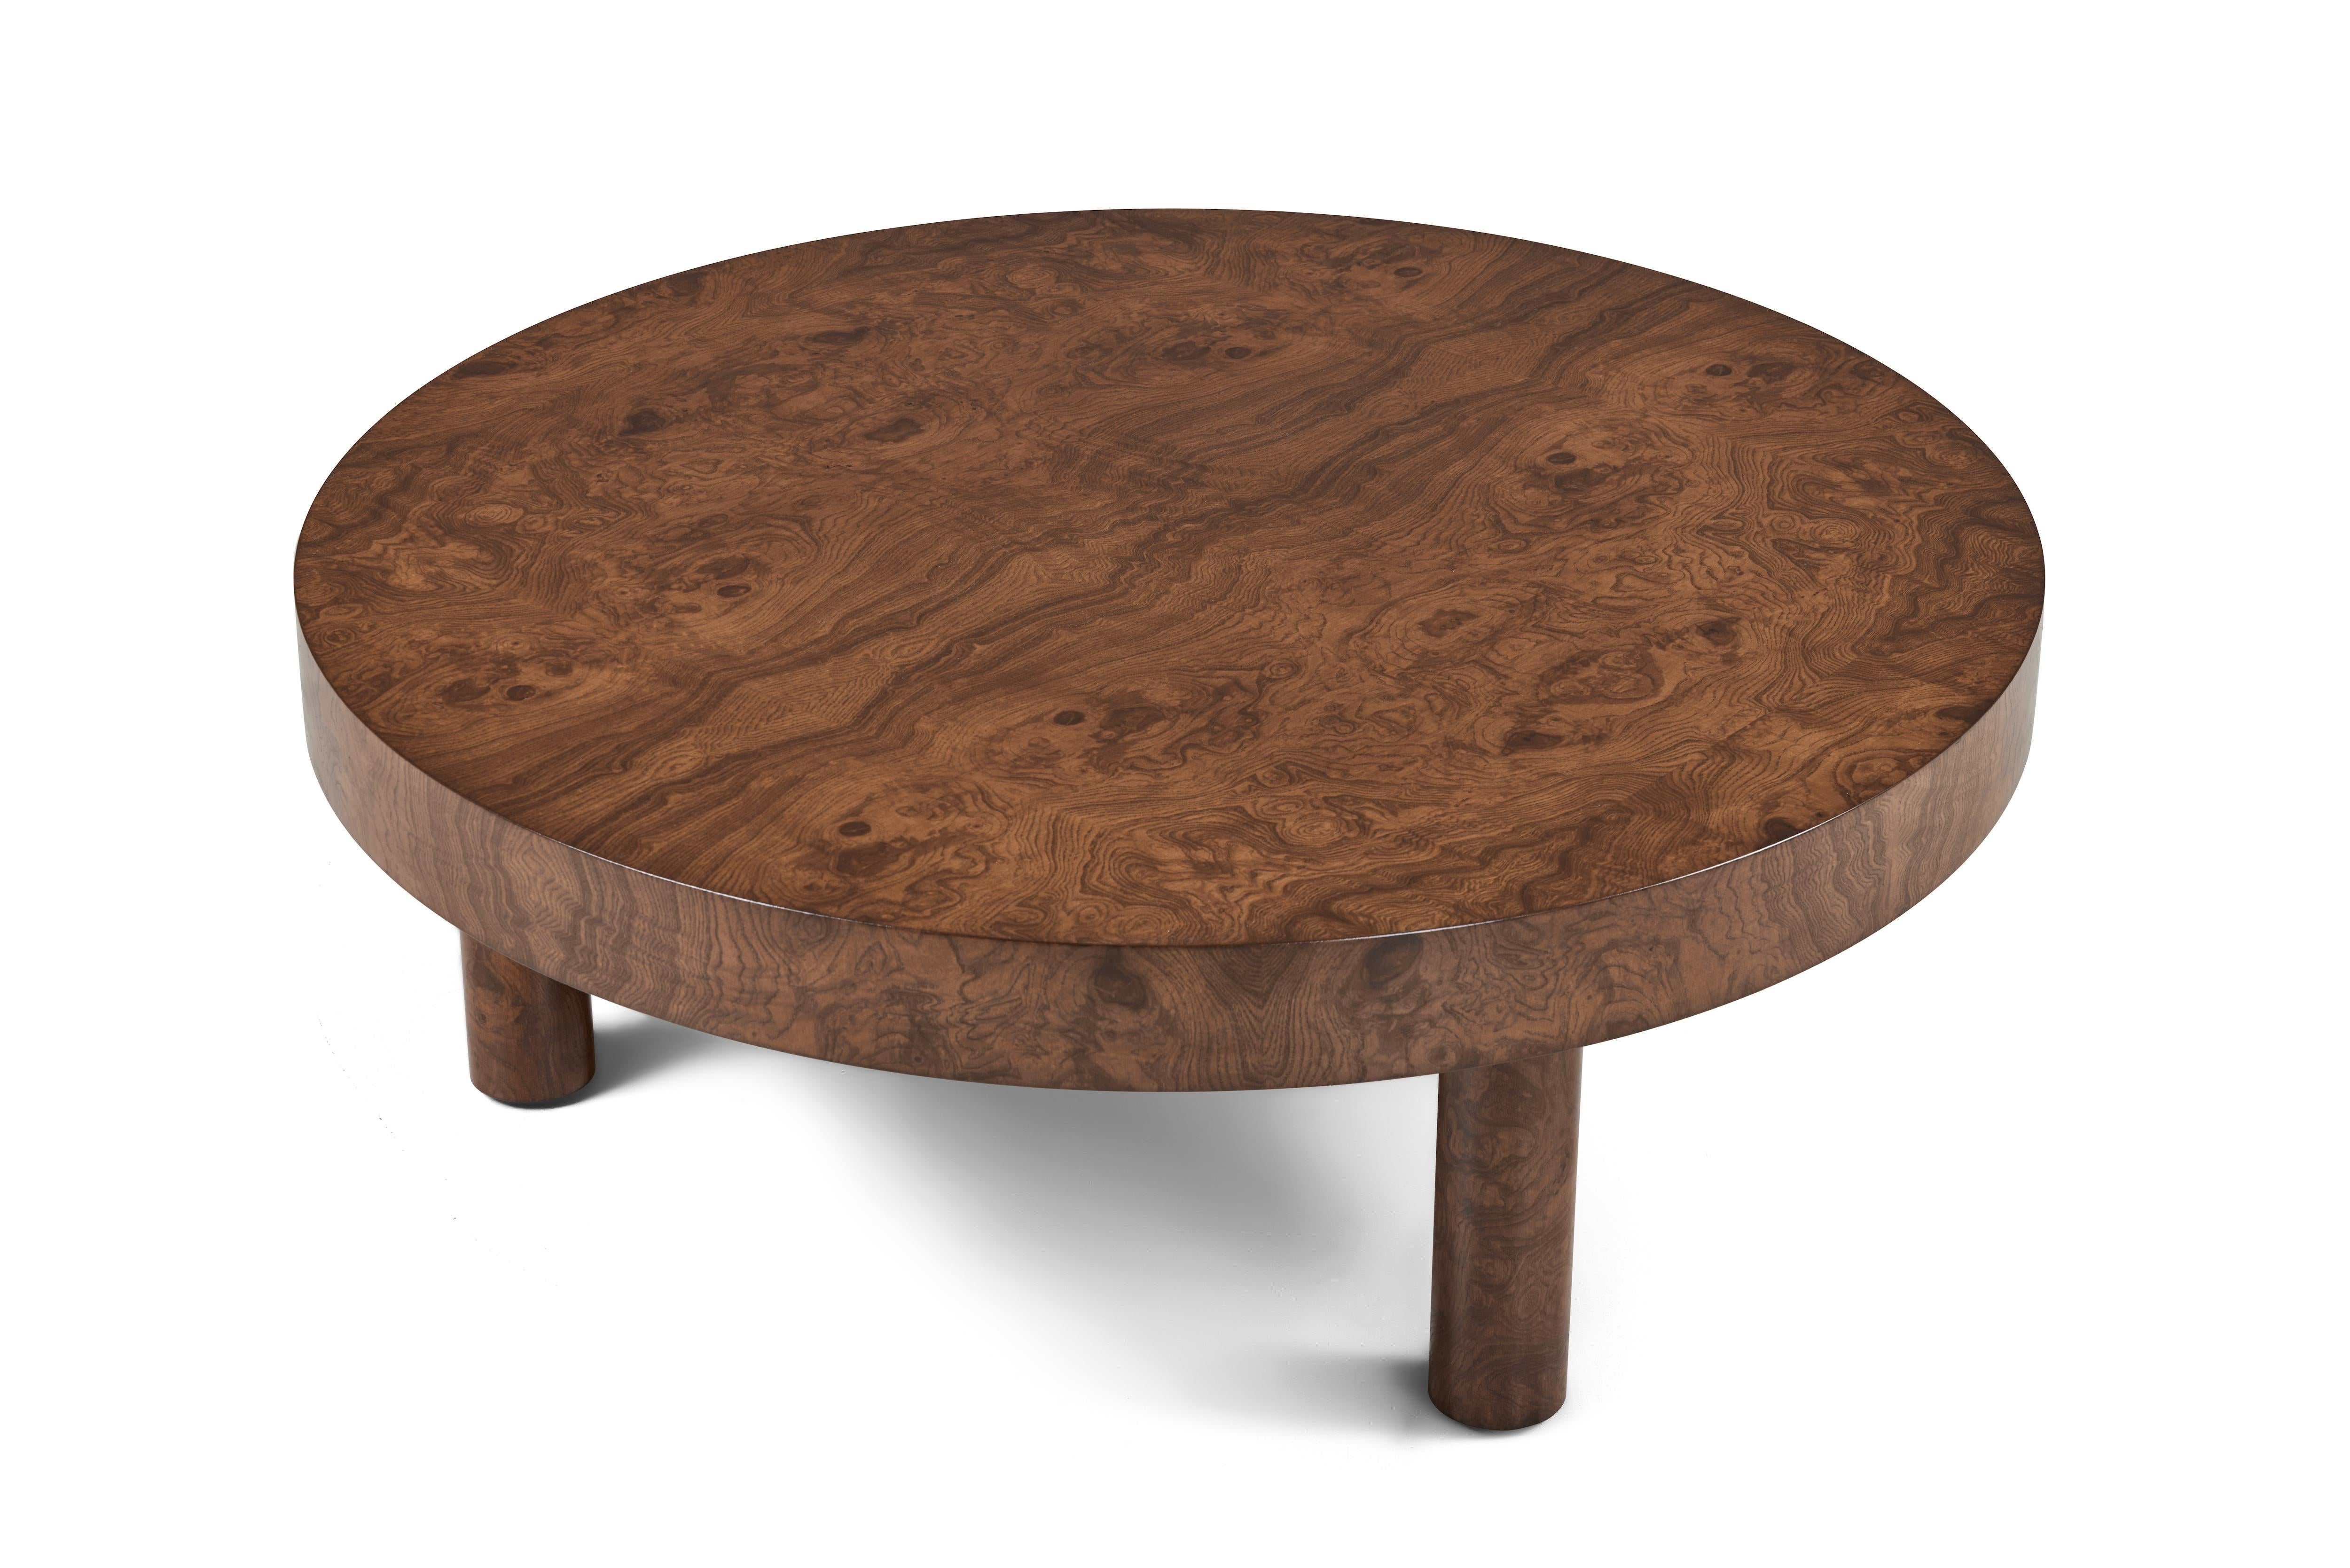 Figural woods and casual, clean lines combine in our Carlton Table, shown here in our Vintage Burlwood finish. 

Dimensions: 16